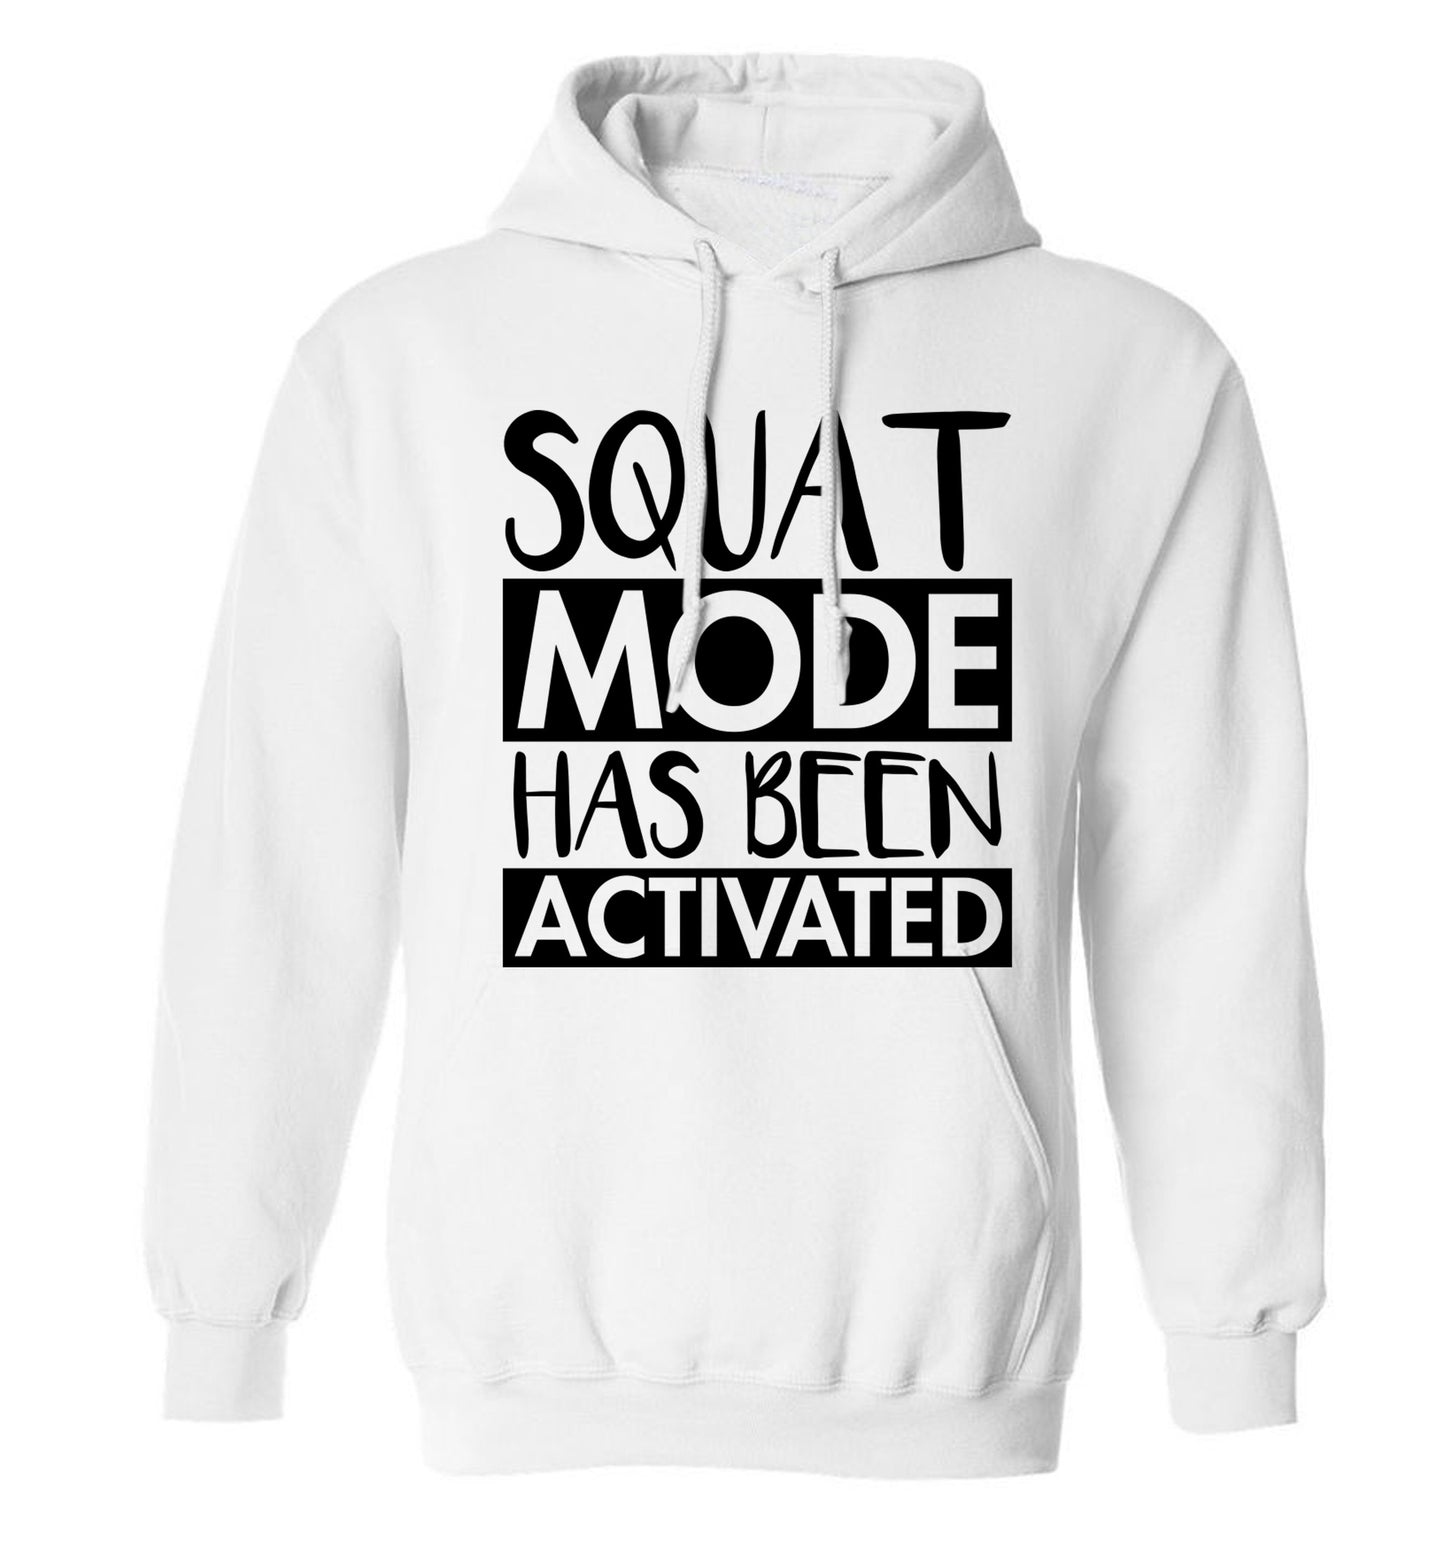 Squat mode activated adults unisex white hoodie 2XL